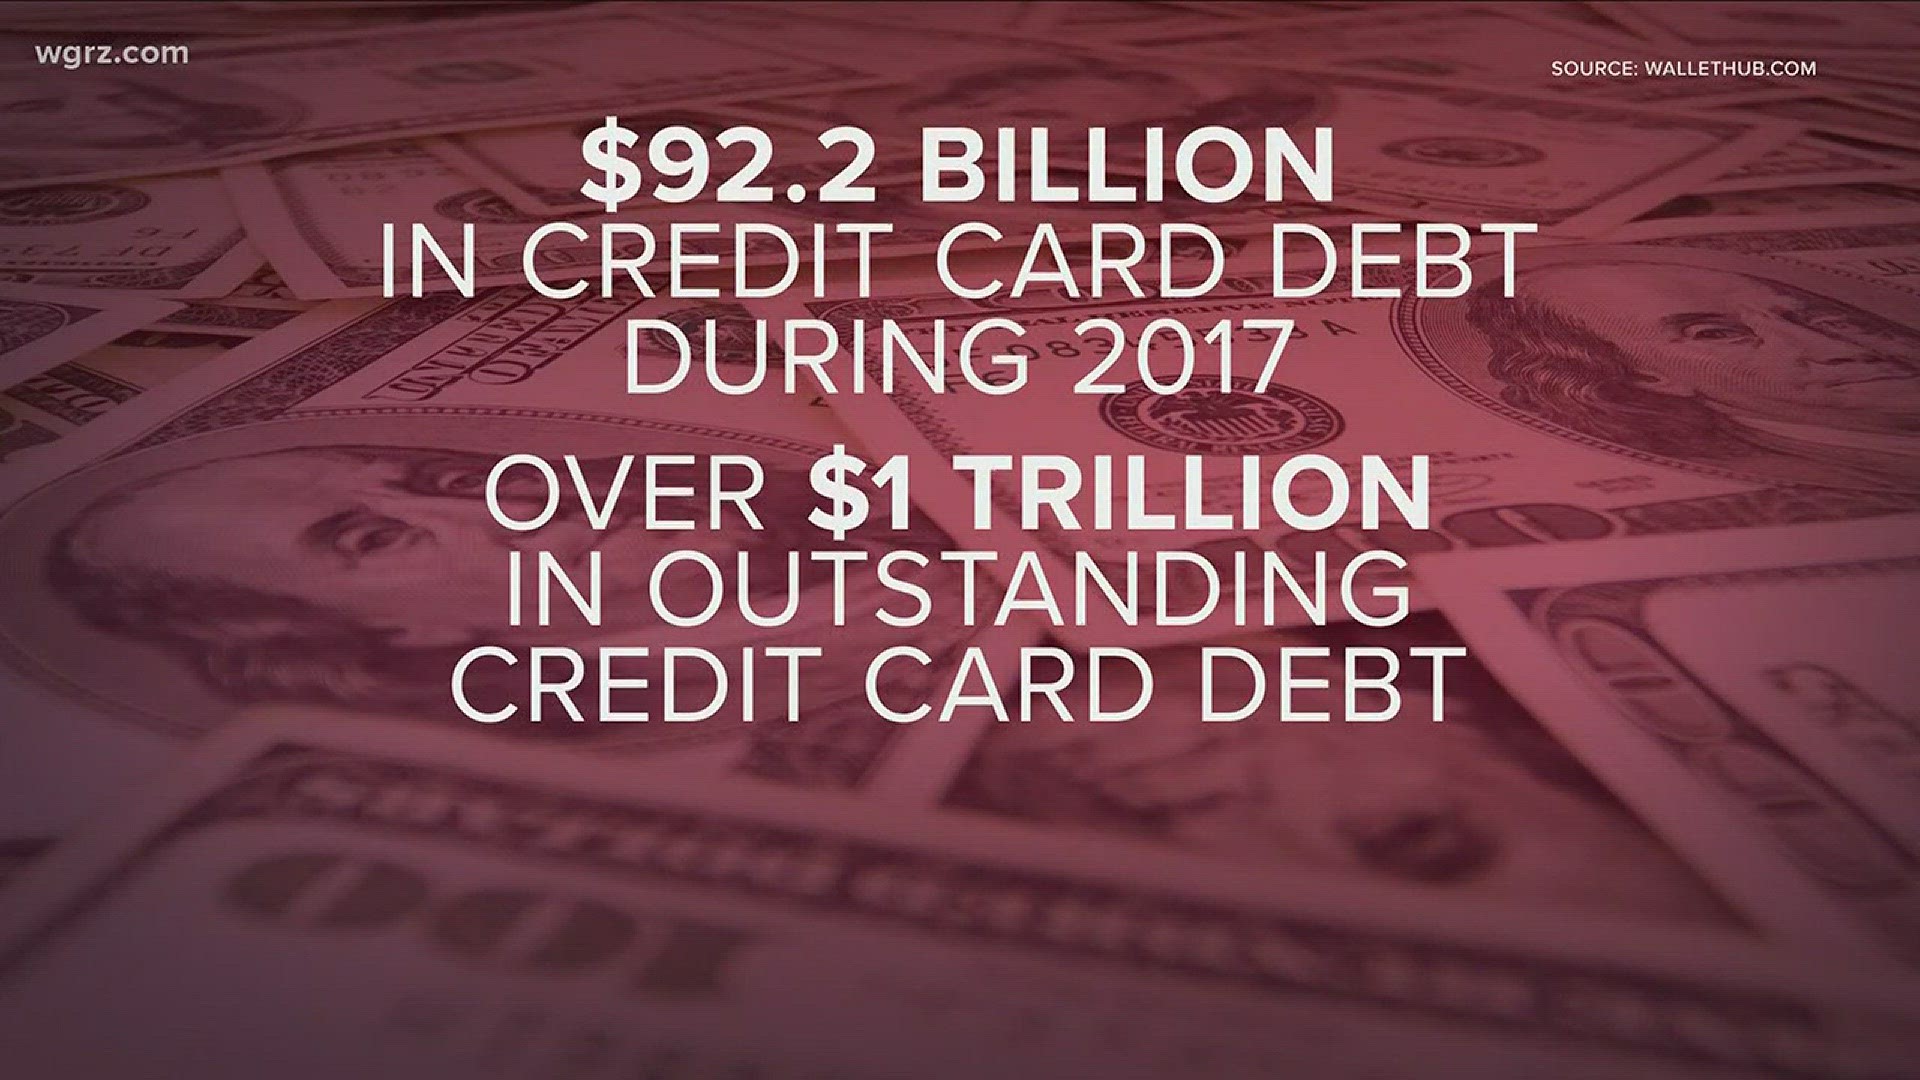 Debt Hits $1 Trillion For First Time Ever